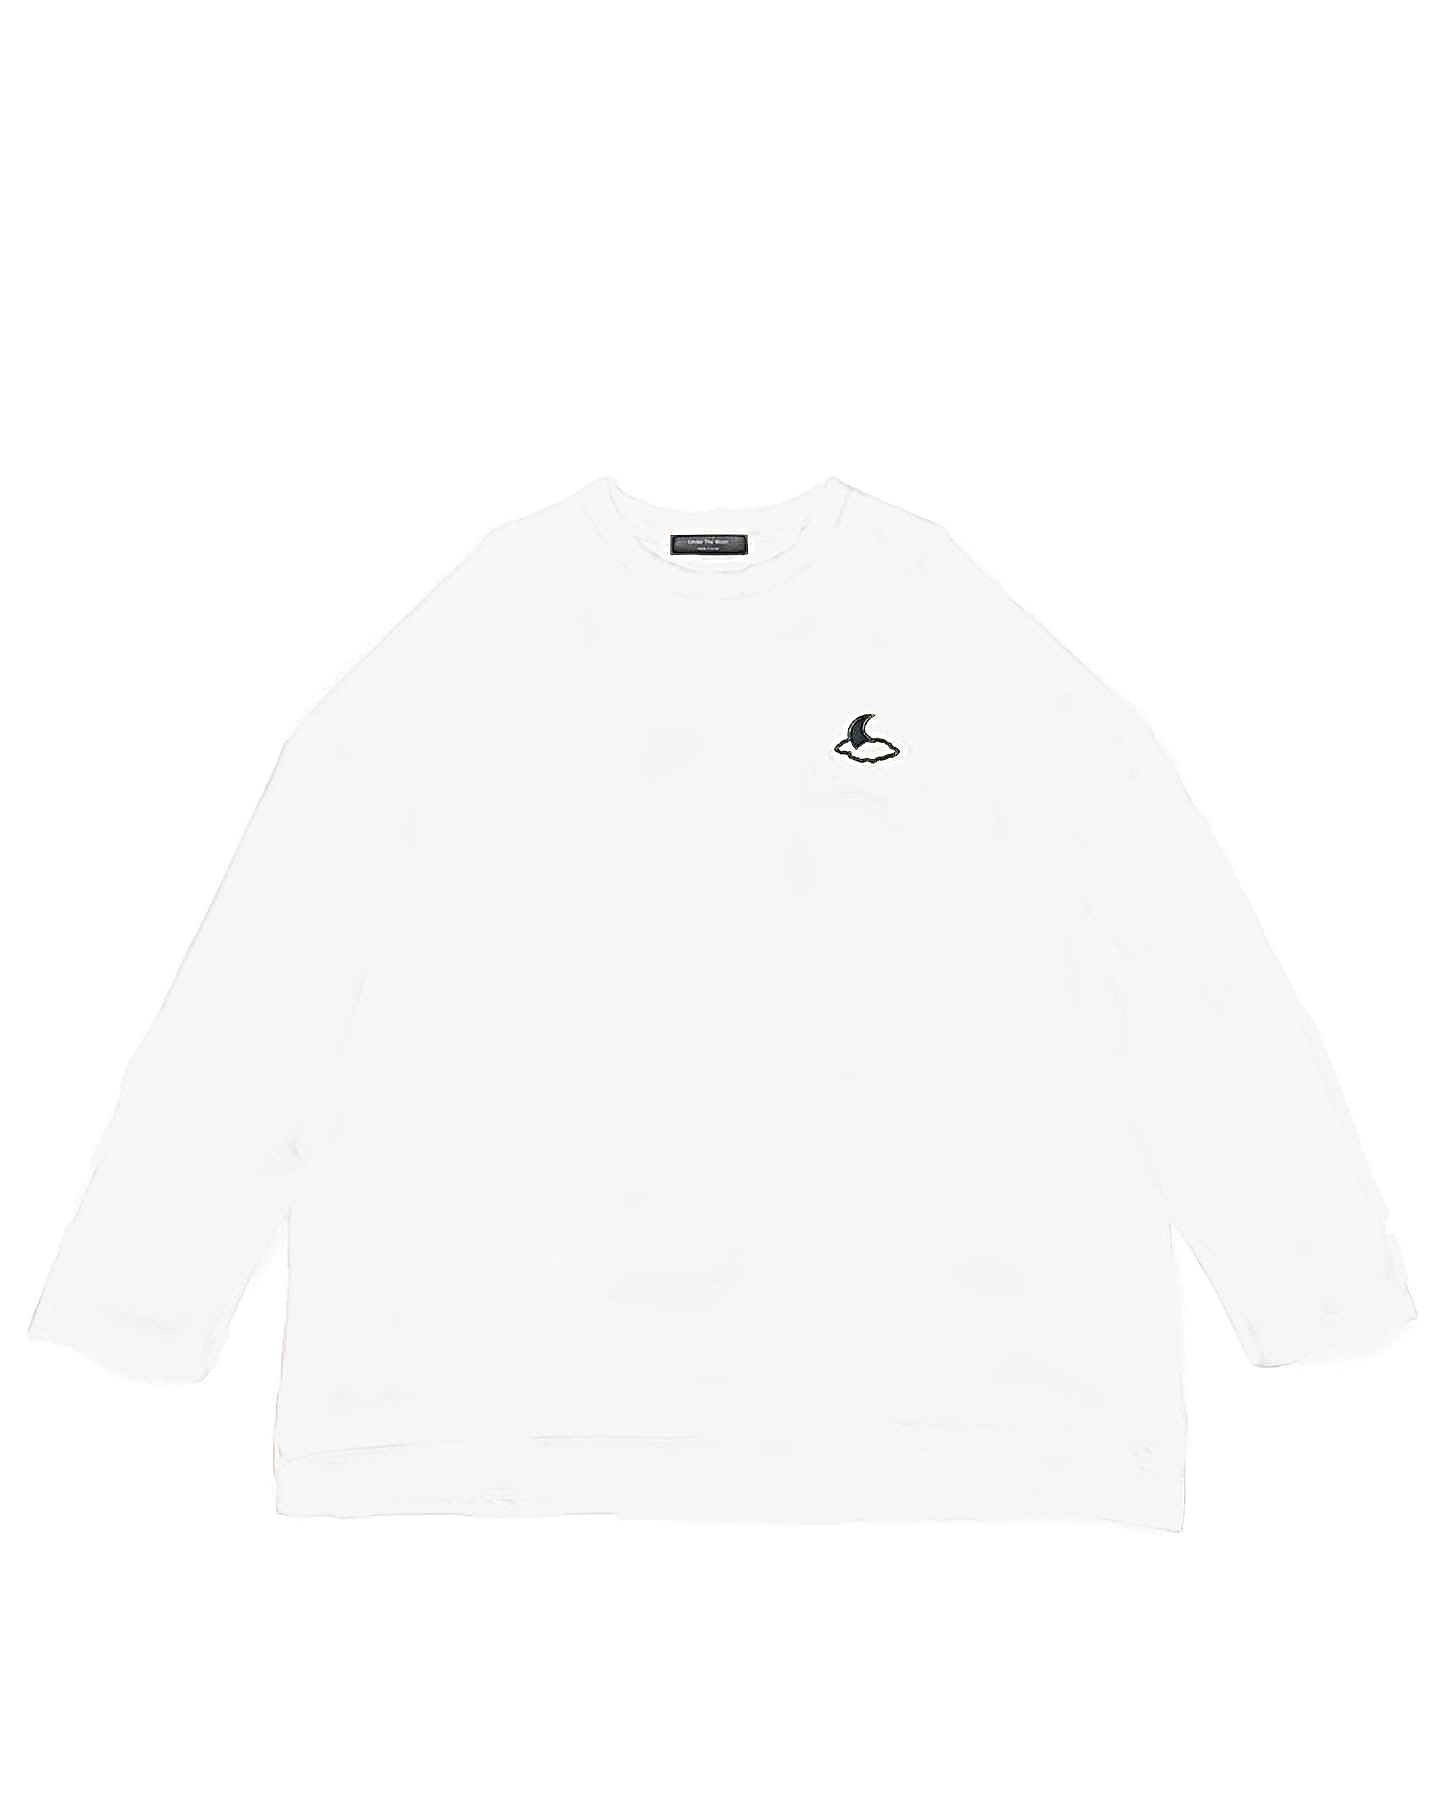 UNDER THE MOON embroidered logo long sleeve tee